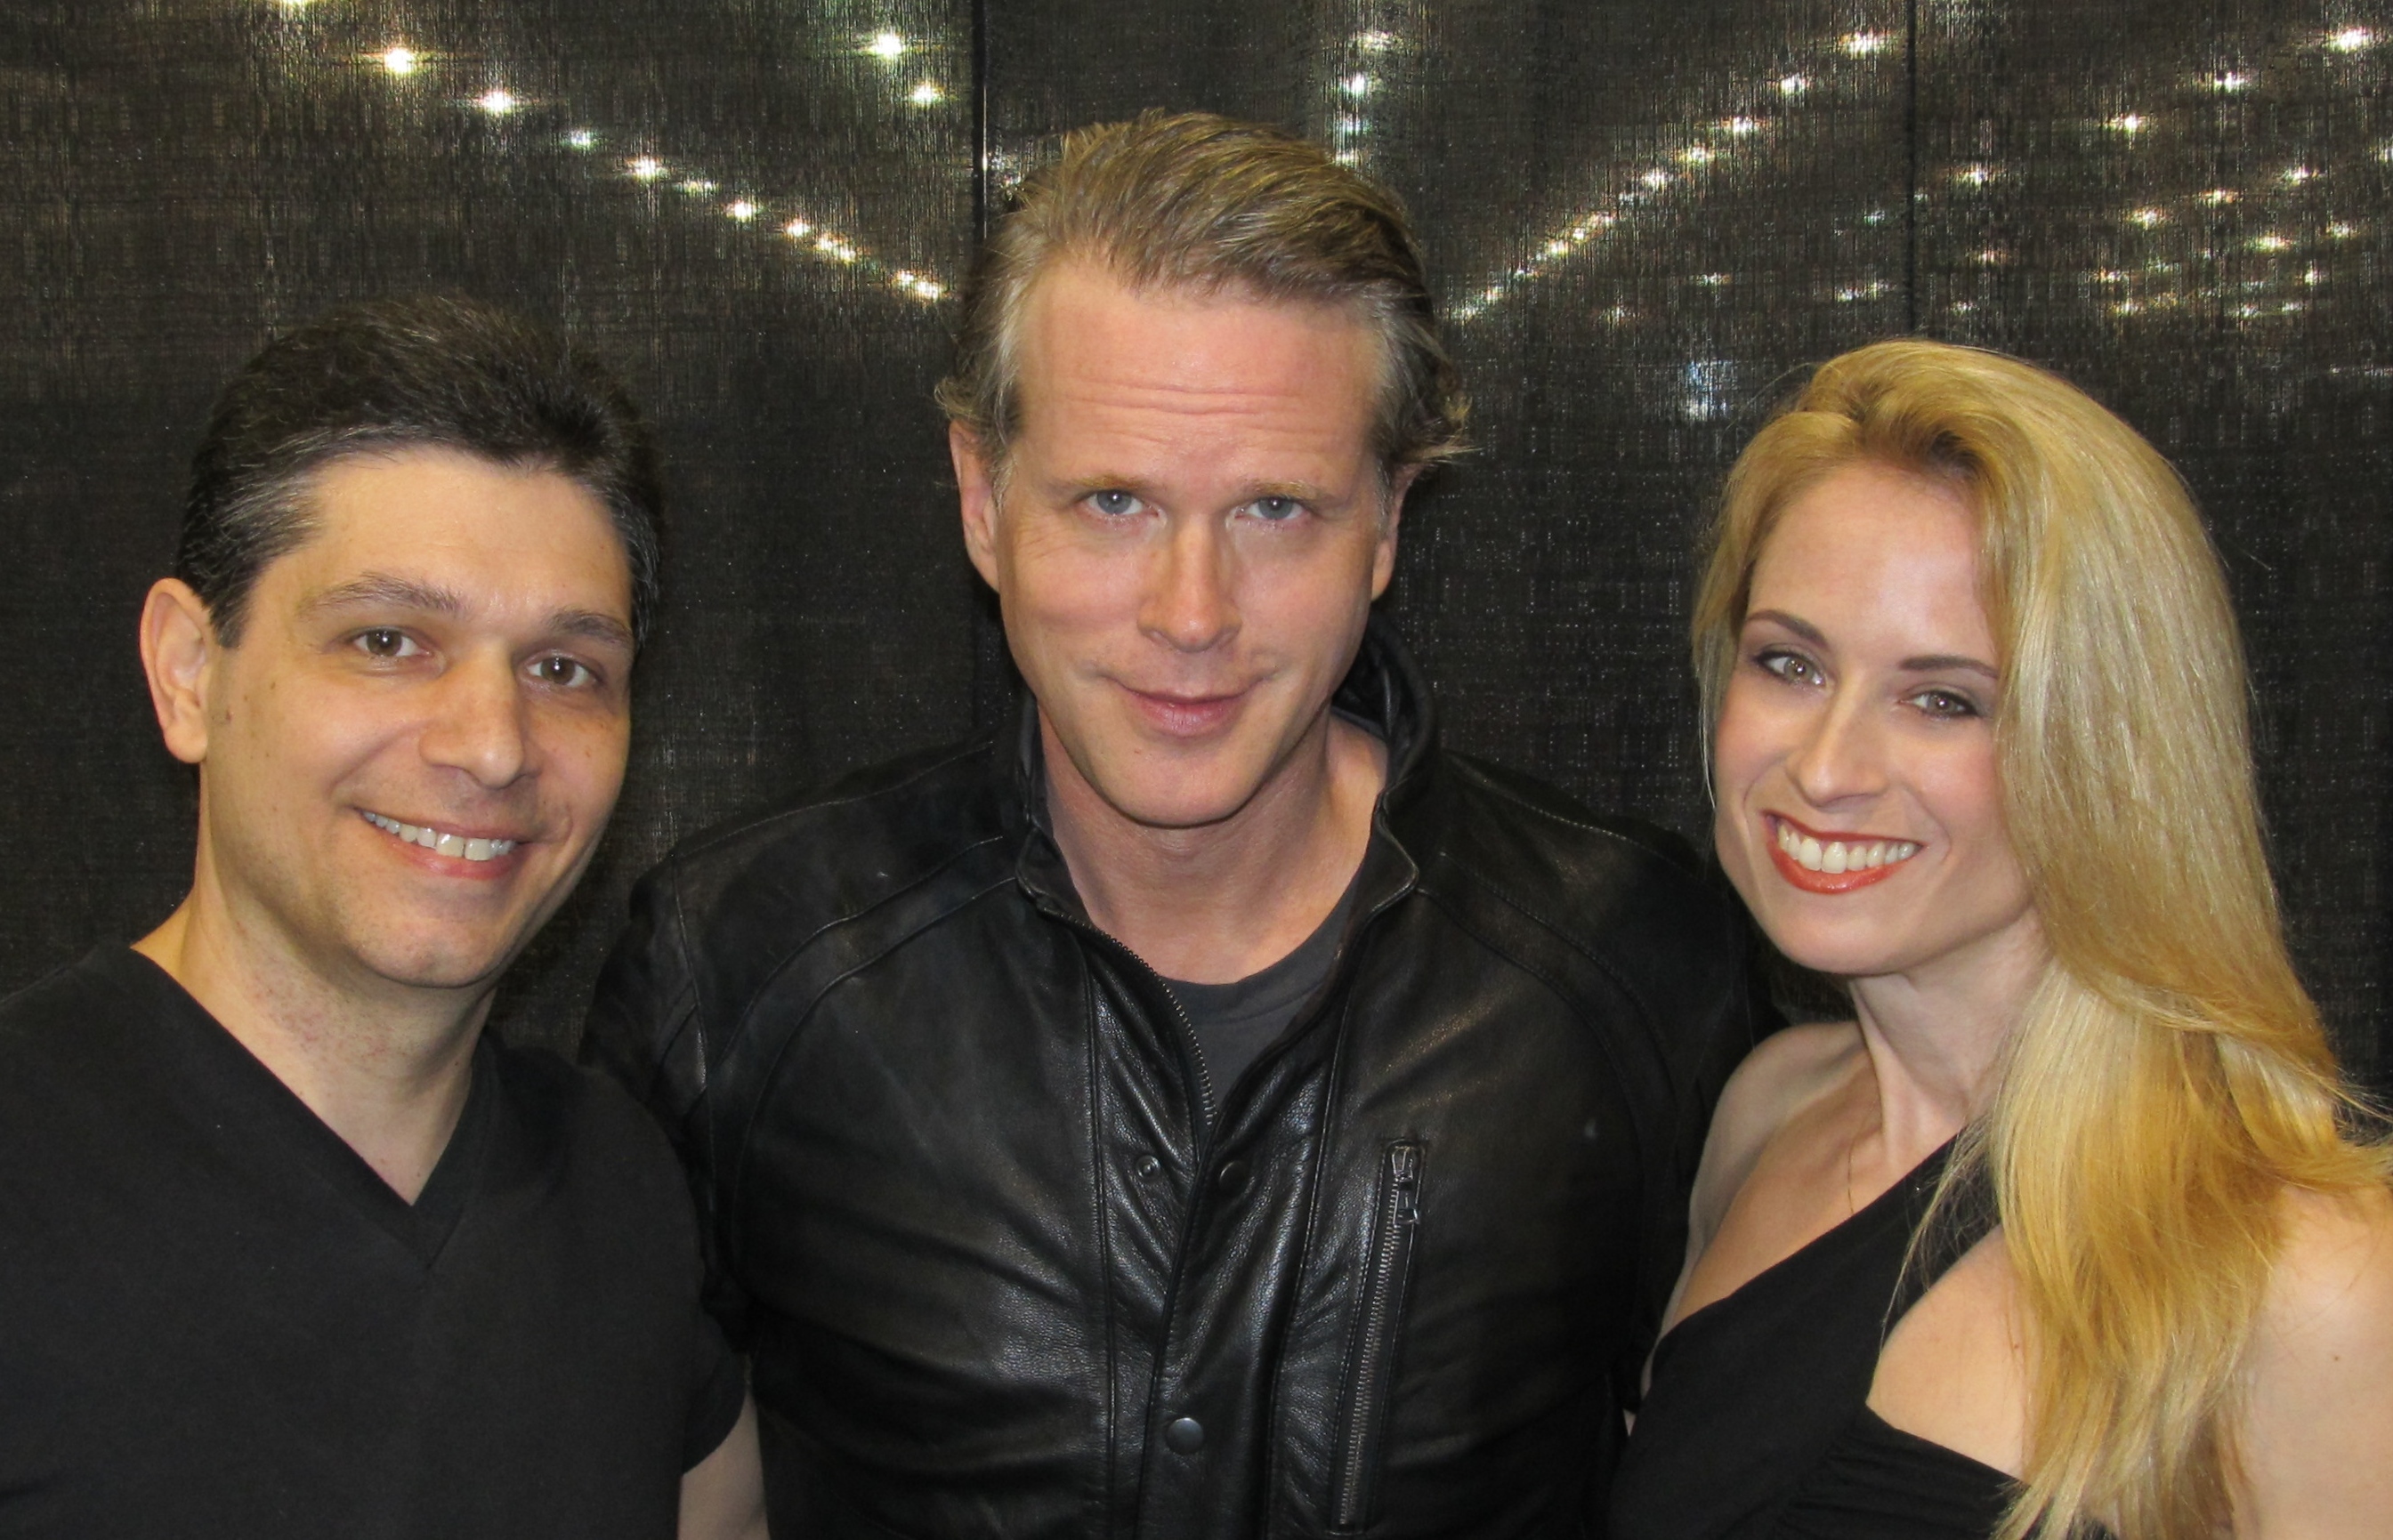 Jack Thomas Smith, girlfriend Mandy Del Rio, and Cary Elwes at the Wizard World Comic Con Philadelphia, PA (2015)